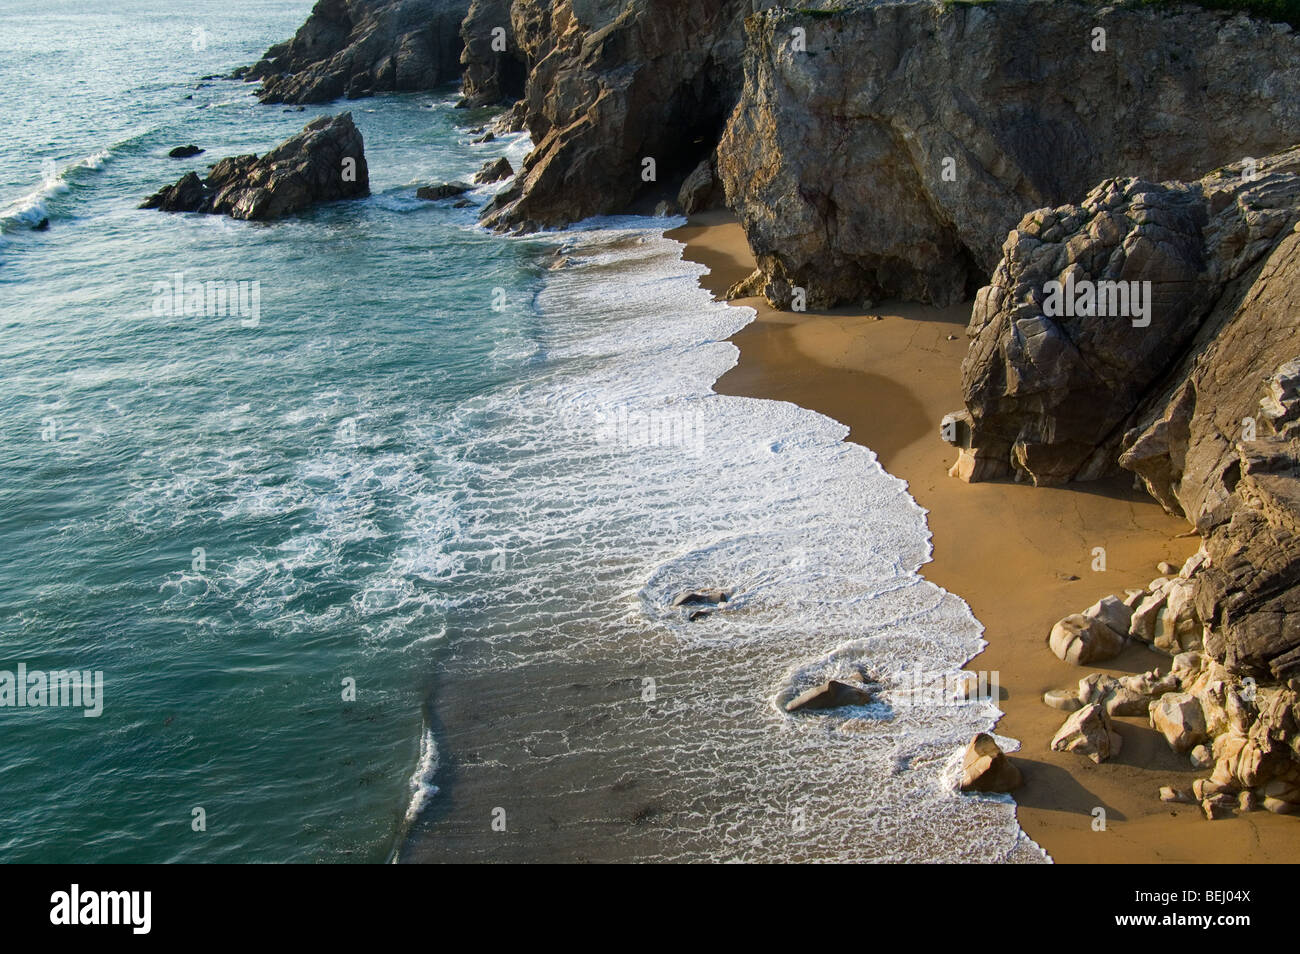 Sandy beach and cliff face at the Côte Sauvage / Wild Coast, Quiberon, Brittany, France Stock Photo